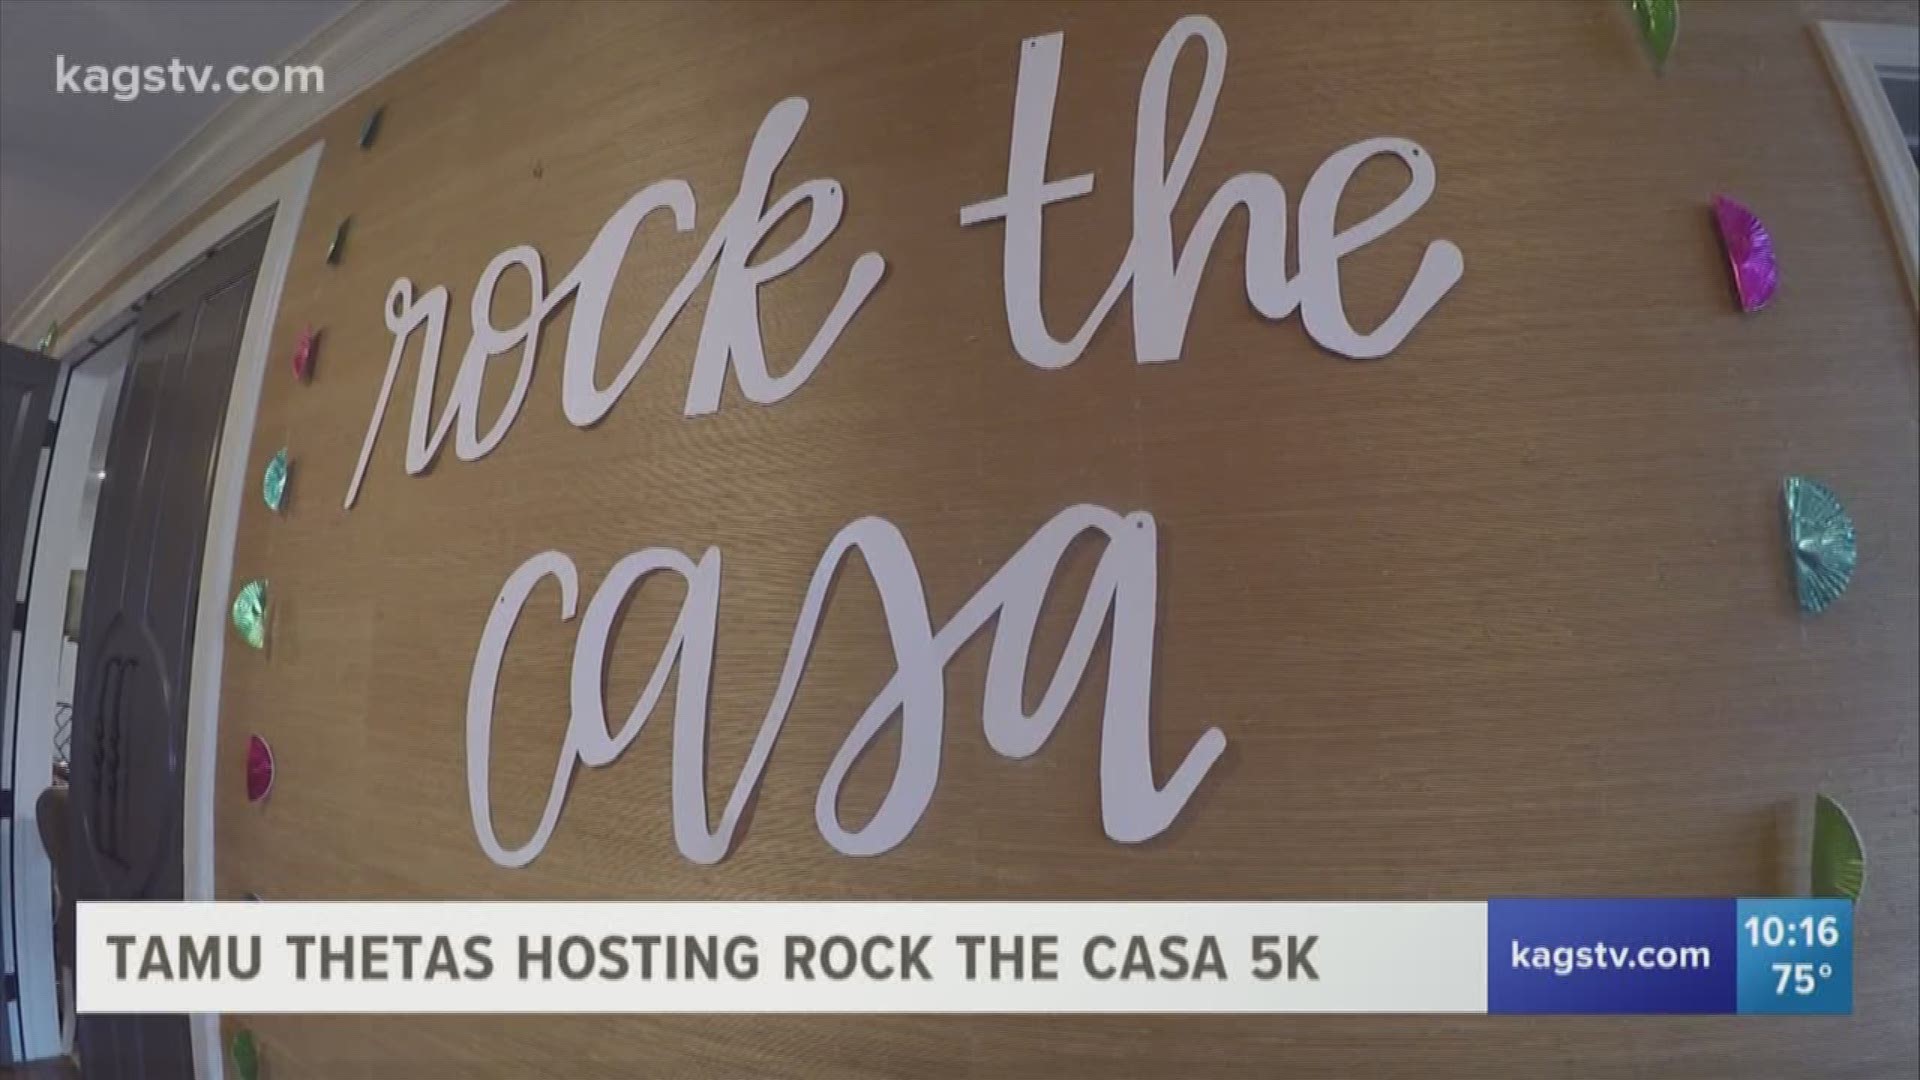 A big event racing into town tomorrow is the Texas A&M Kappa Alpha Theta's Rock The Case 5K. All proceeds from the event go to CASA and Scotty's House to help local children affected by child abuse.